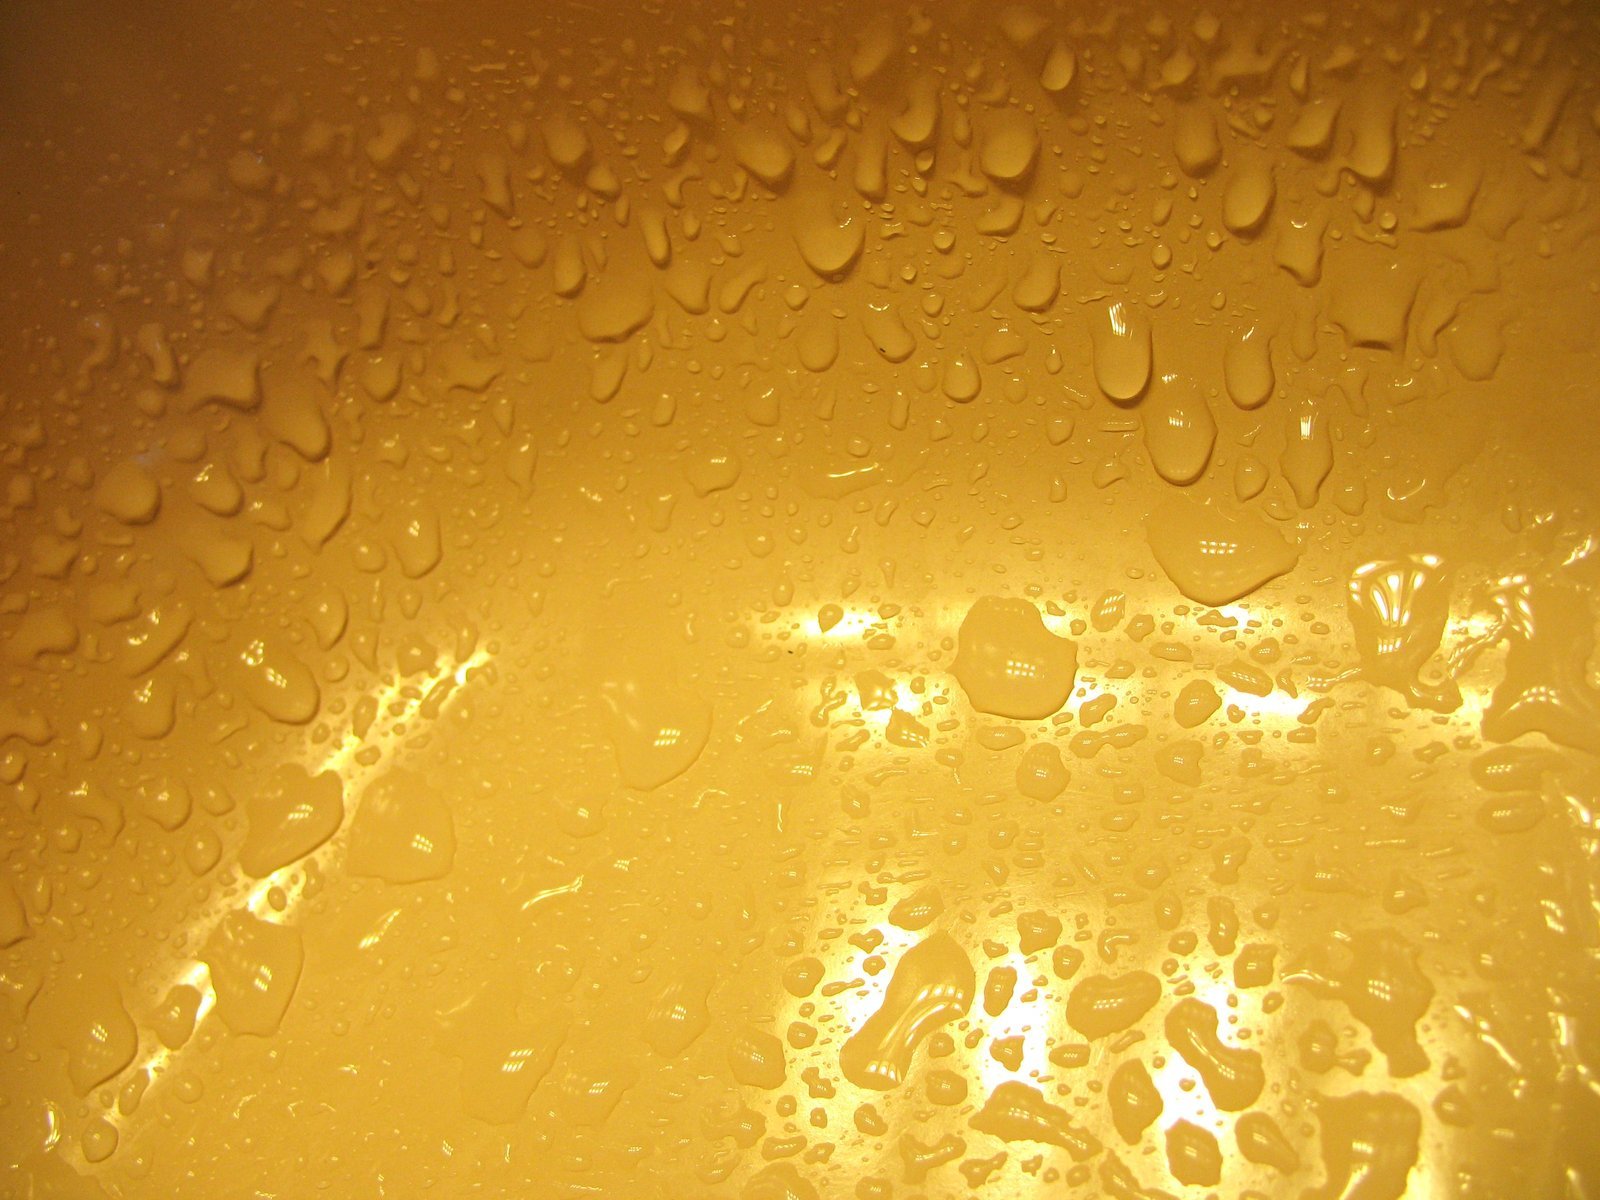 an extreme close up view of yellow bubbles on water